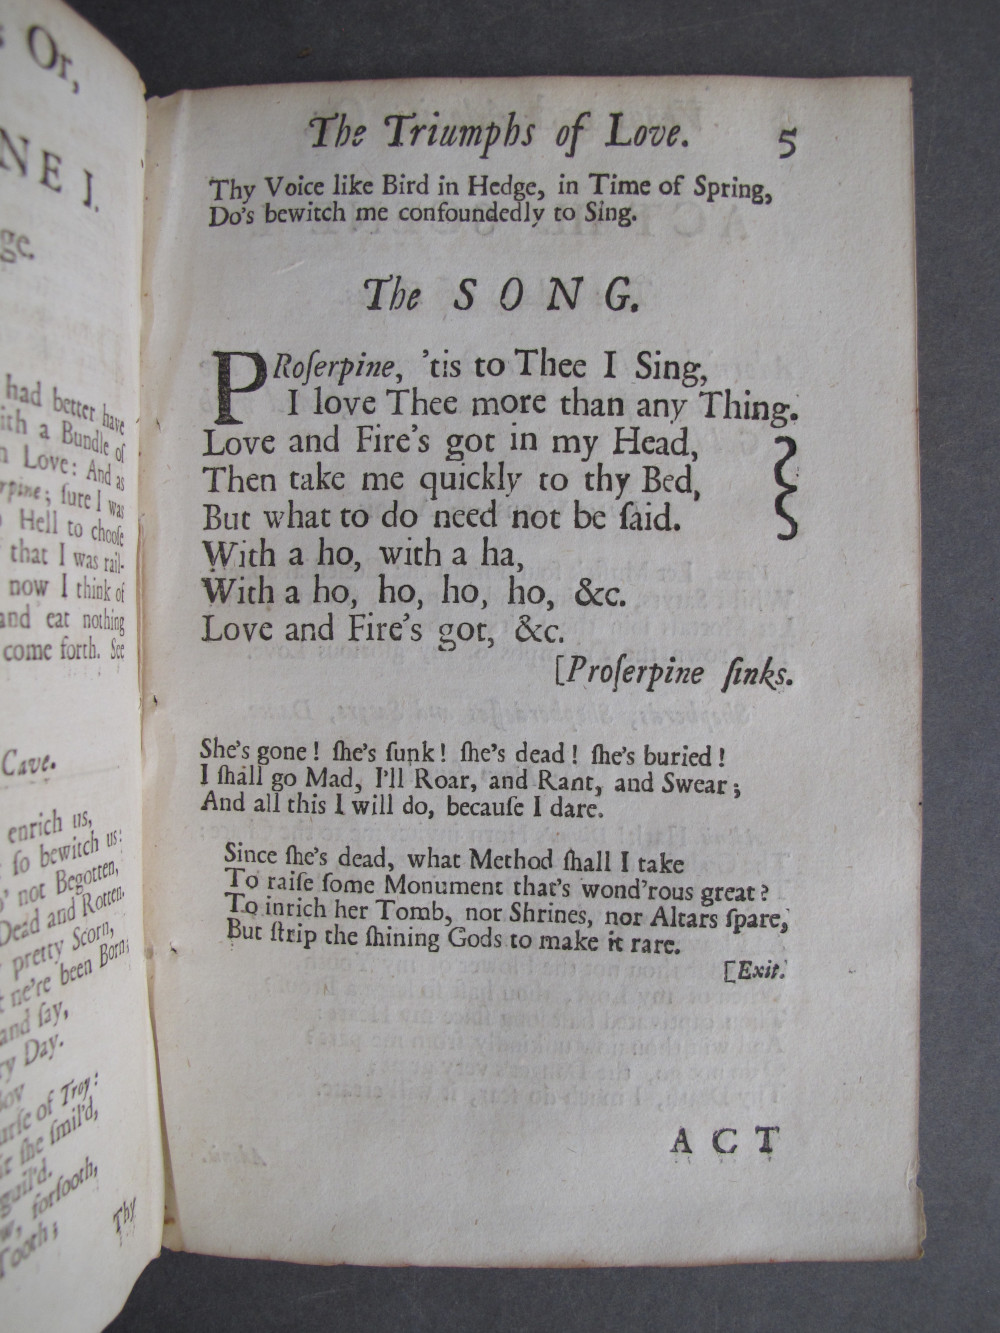 Page 5, text: 
The Triumphs of Love. 5

Thy Voice like Bird in Hedge, in Time of Spring,
Do's bewitch me confoundedly to Sing.

The SONG.

Proserpine, 'tis to Thee I Sing,
I love Thee more than any Thing.
Love and Fire's got in my Head,
Then take me quickly to thy Bed,
But what to do need not be said.
With a ho, with a ha,
With a ho, ho, ho, ho, &c.
Love and Fire's got, &c.
[Proserpine s1inks.

She's gone! she's sunk! she's dead! she's buried!
I shall go Mad, I'll Roar, and Rant, and Swear;
And all this I will do, because I dare.

Since she's dead, what Method shall I take
To raise some Monument that's wondrous great?
To inrich her Tomb, nor Shrines, nor Altars spare,
But strip the shining Gods to make it rare.
[Exit.

ACT

